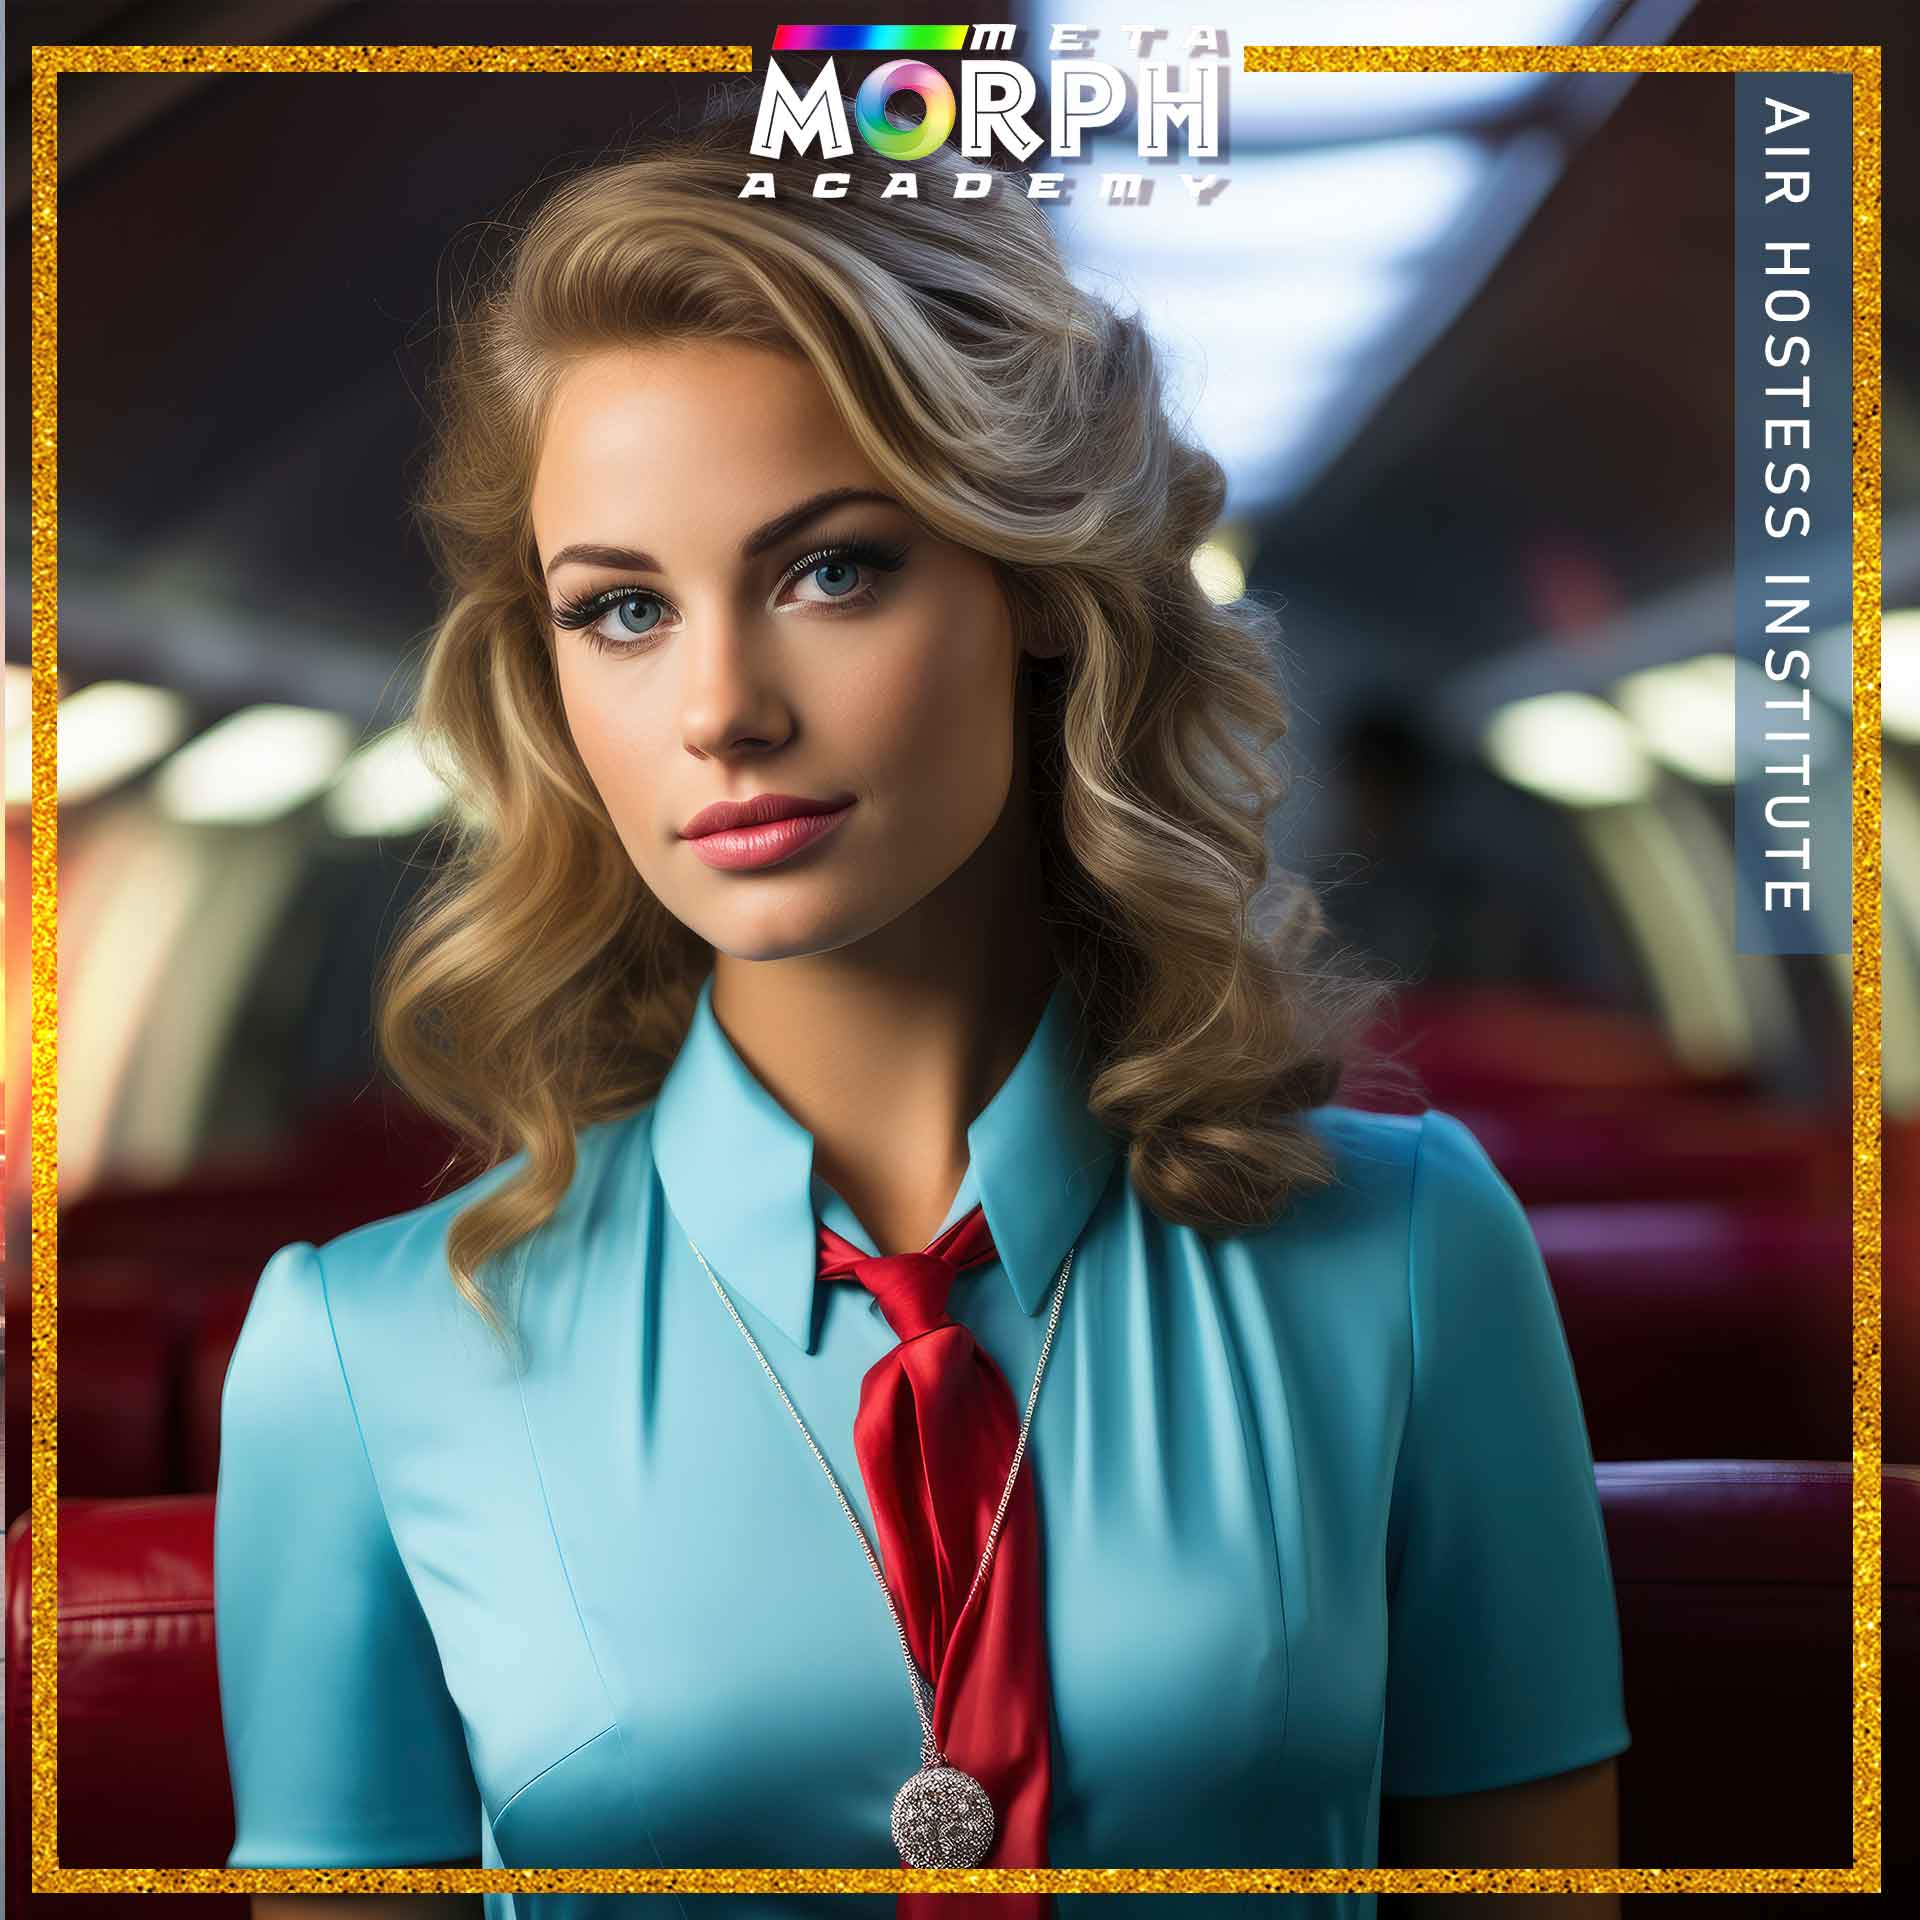 Advance Diploma in Aviation Air Hostess Customer Service and Hospitality Management